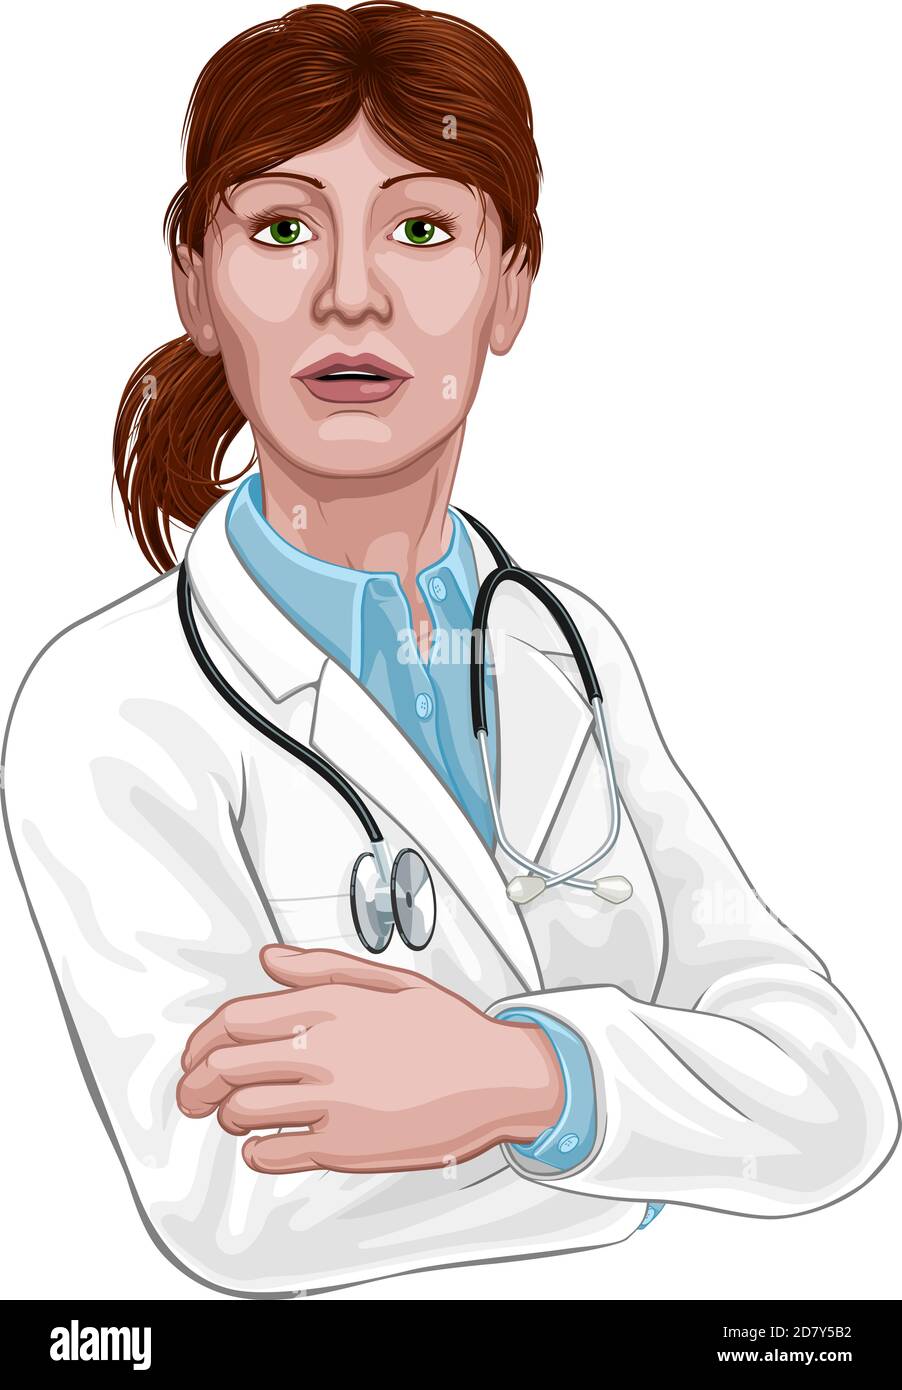 Doctor Woman Medical Healthcare Character Stock Vector